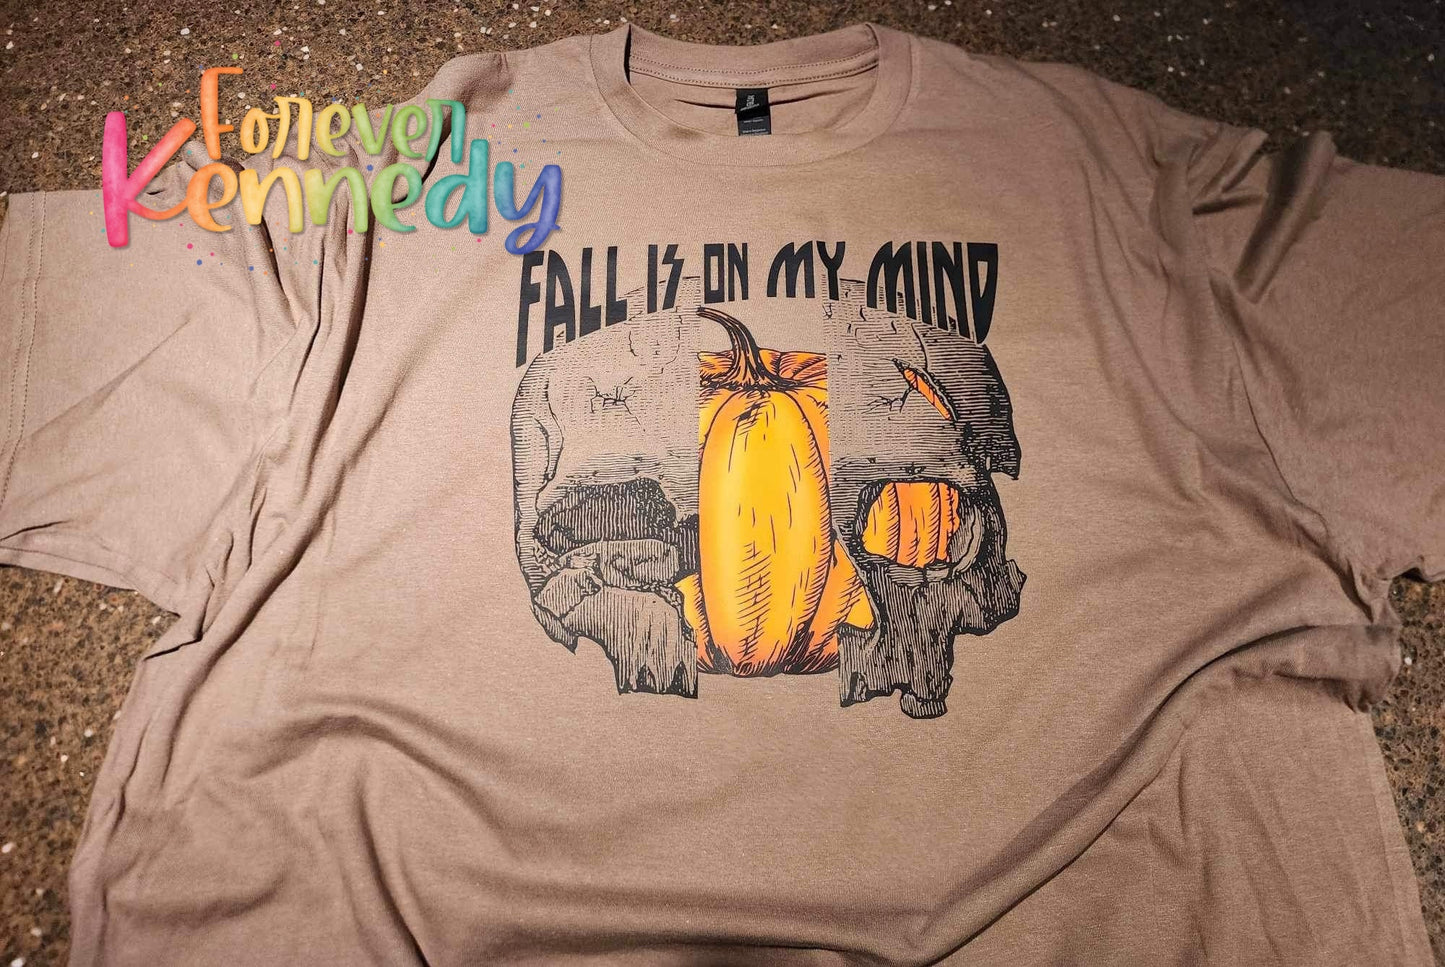 (MTO) Pick Your Apparel: Fall is on my mind